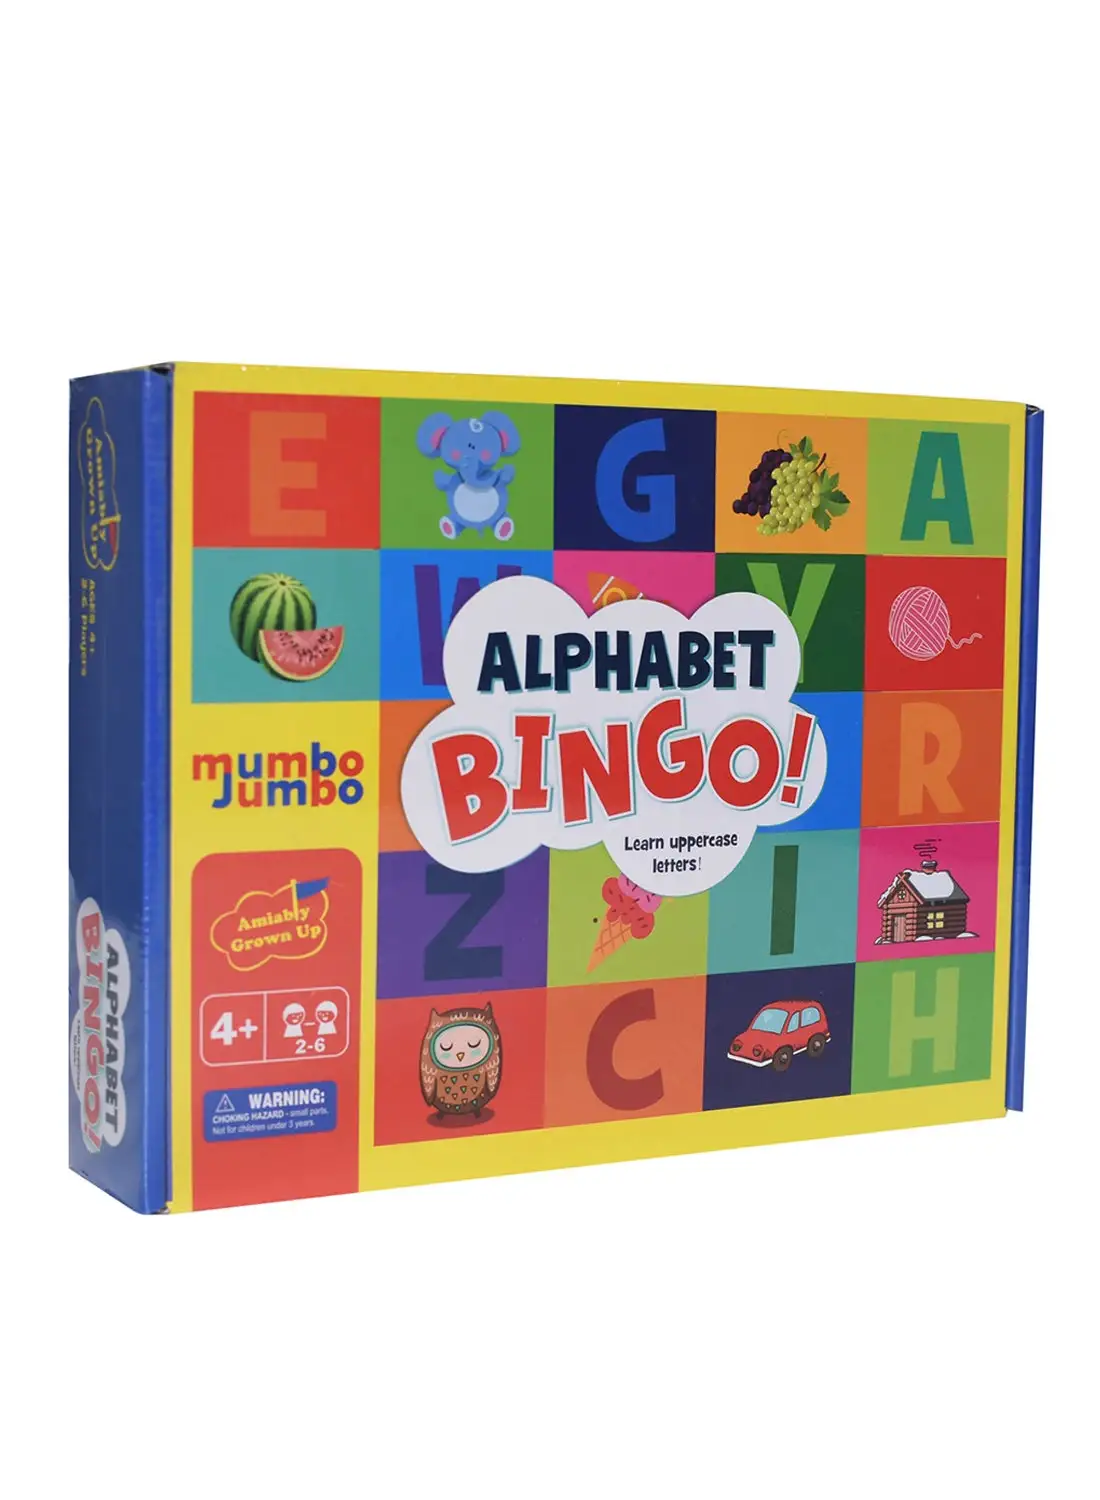 mumbo Jumbo Alphabet Bingo Letter Board Game For Kids 4 Years And Above, Learn All About Alphabets With No Difficulty, Easy To Understand With Graphic Design Features 2 Players